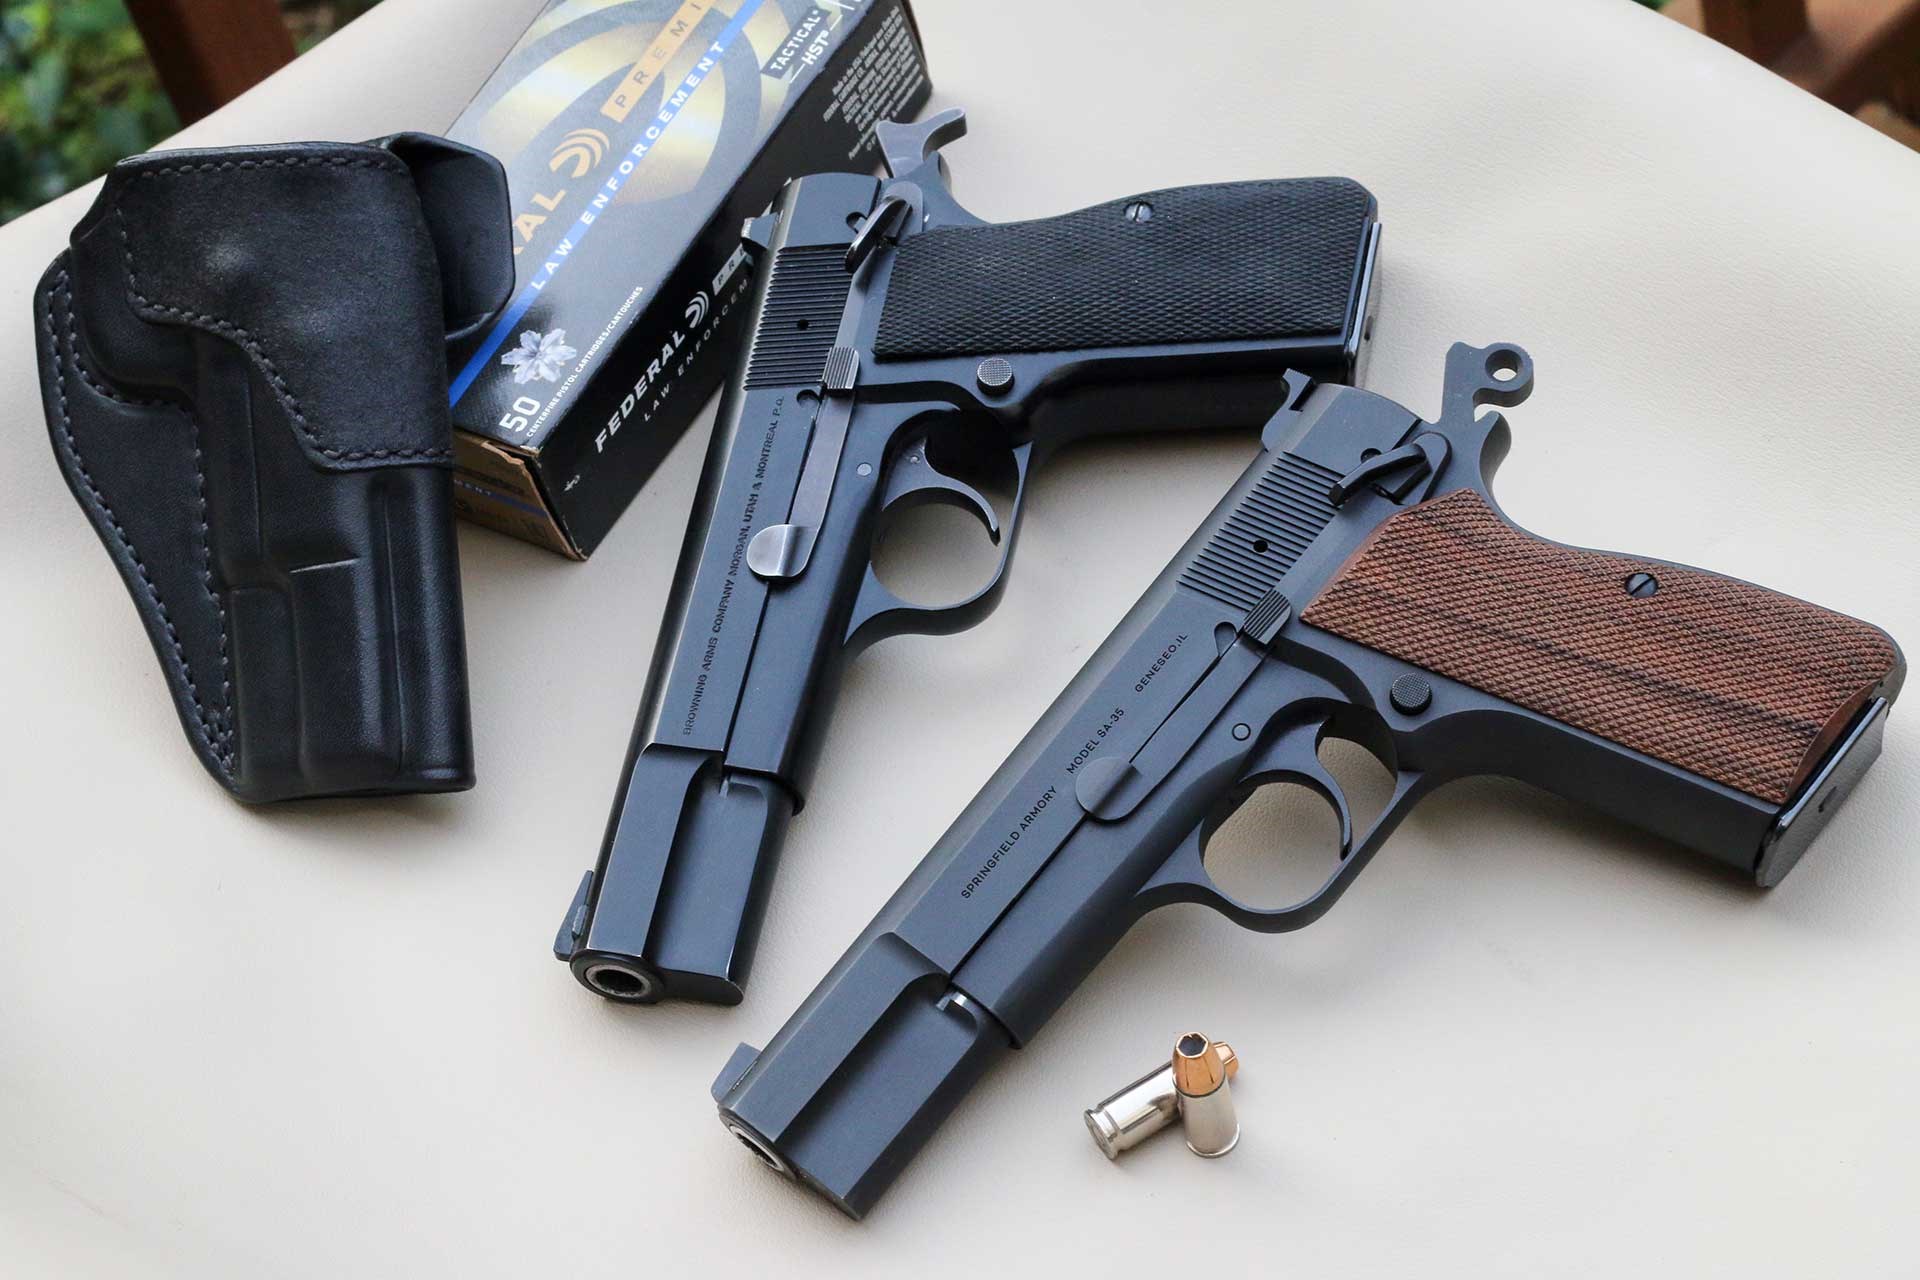 The new Springfield SA-35 High Power shown on a white table next to an original Browning Mk III Hi Power alongside a leather holster and several 9mm cartridges.